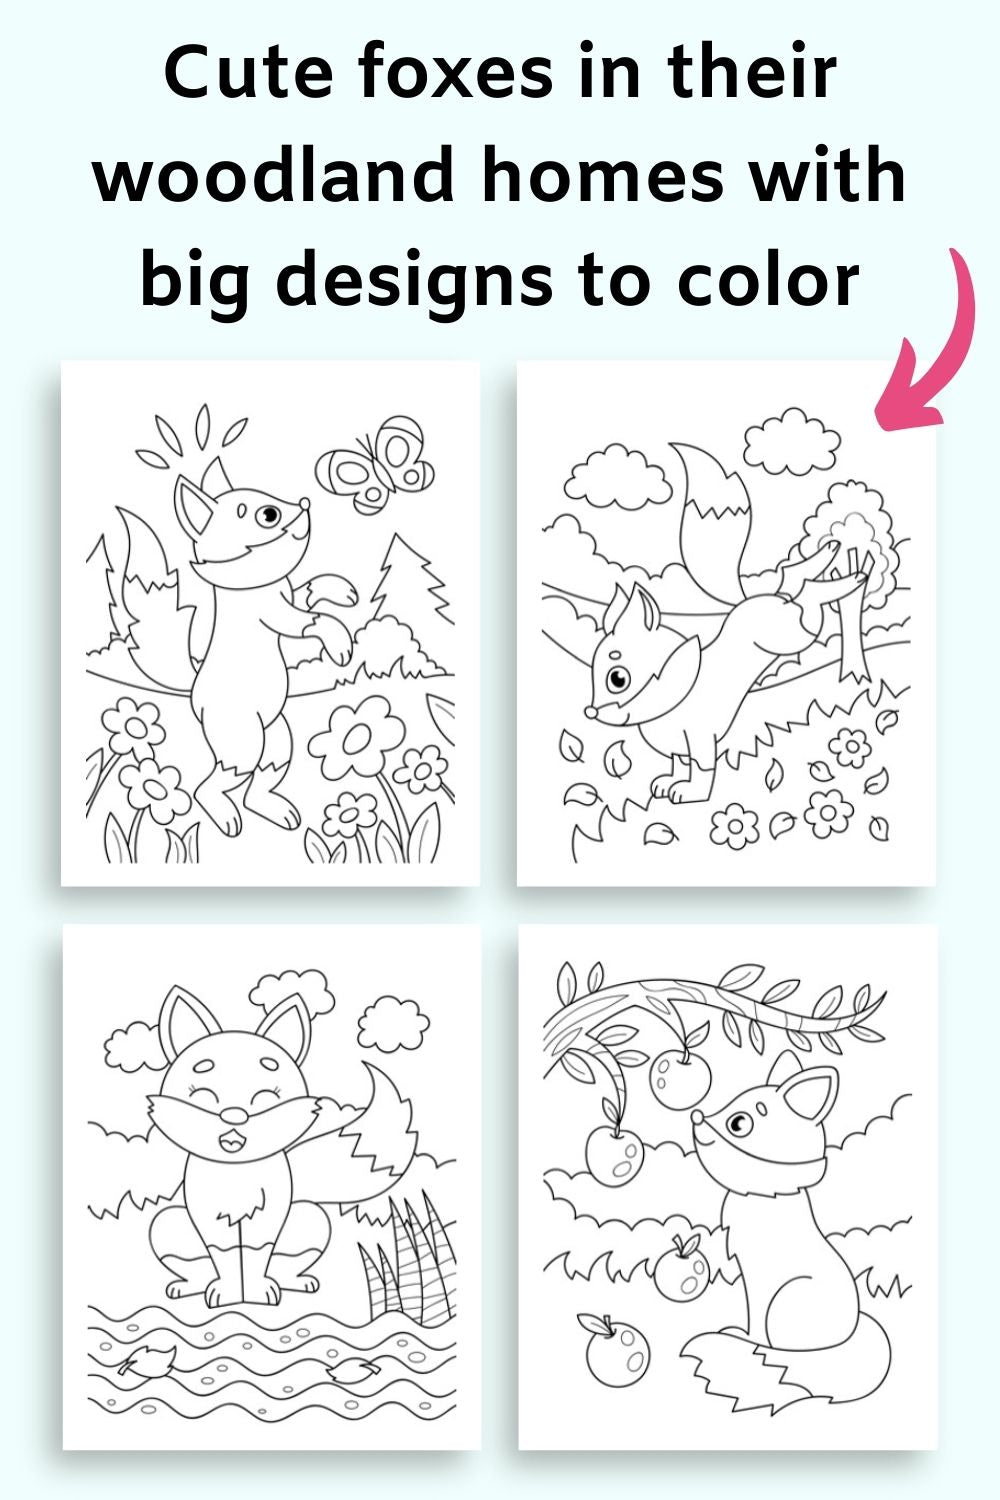 Text "cute foxes in their woodland homes with big designs to color" above a preview of four fox coloring pages.